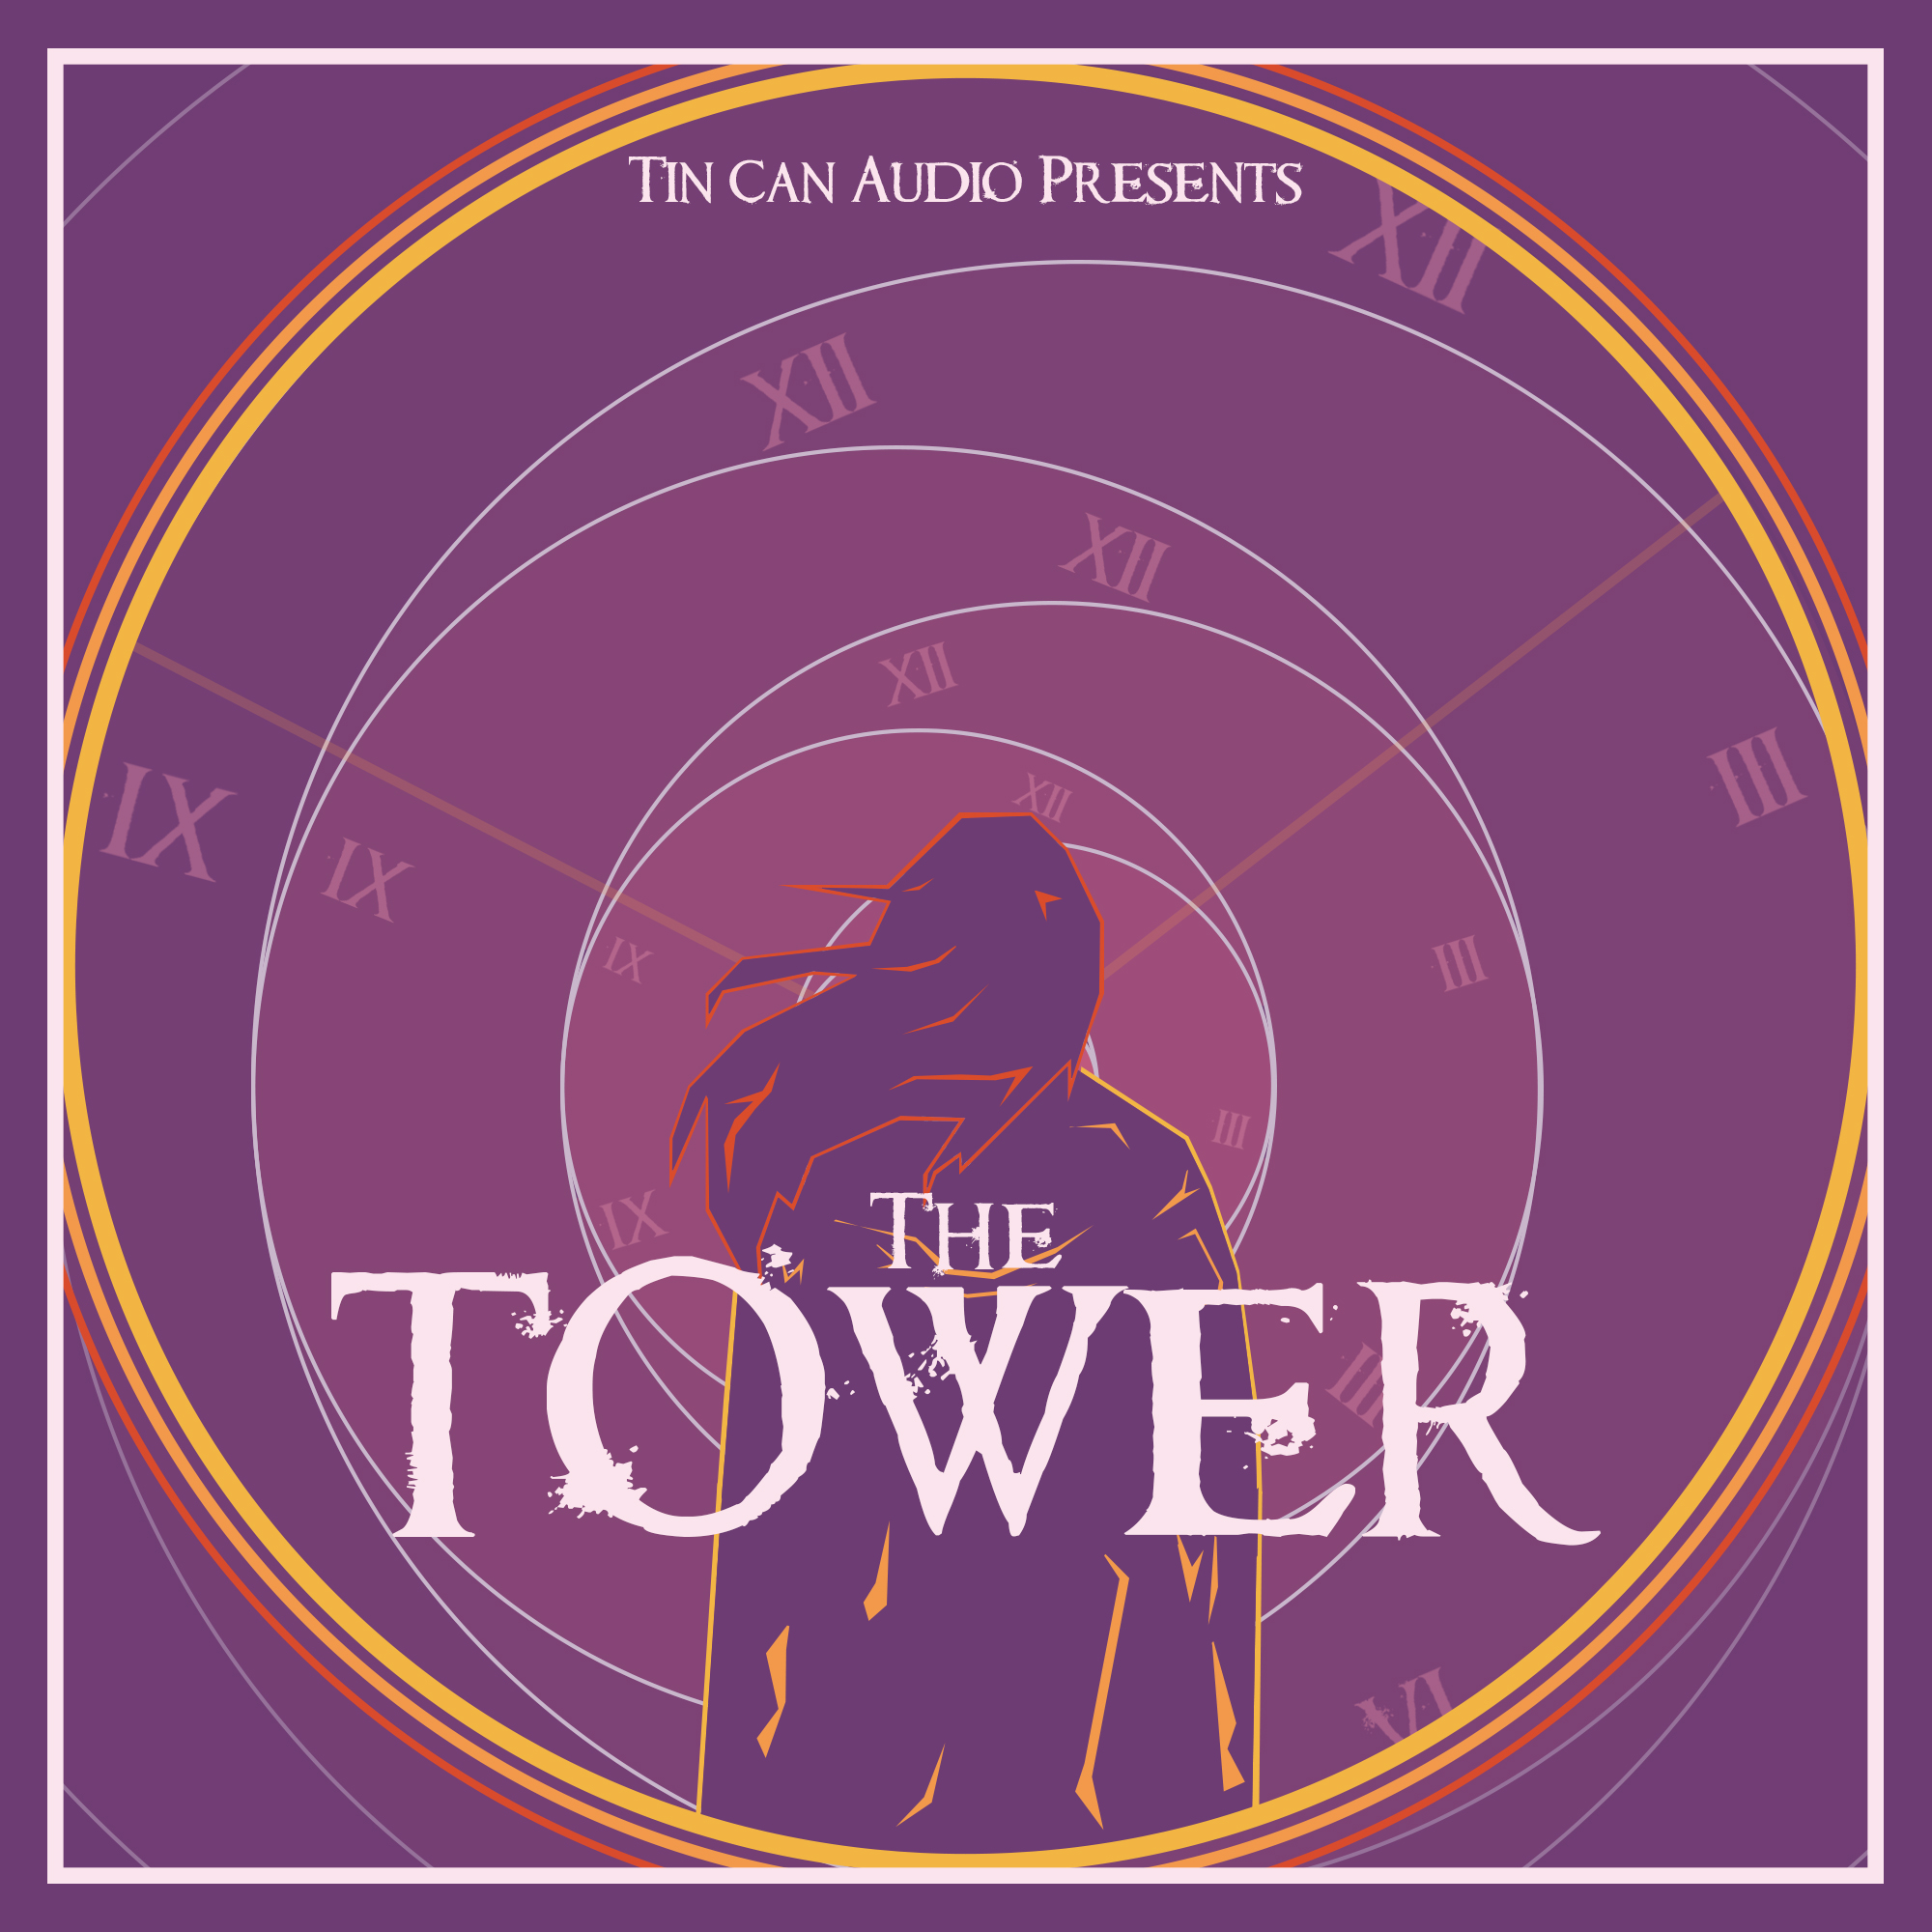 Soundtrack Now On Spotify - The Tower